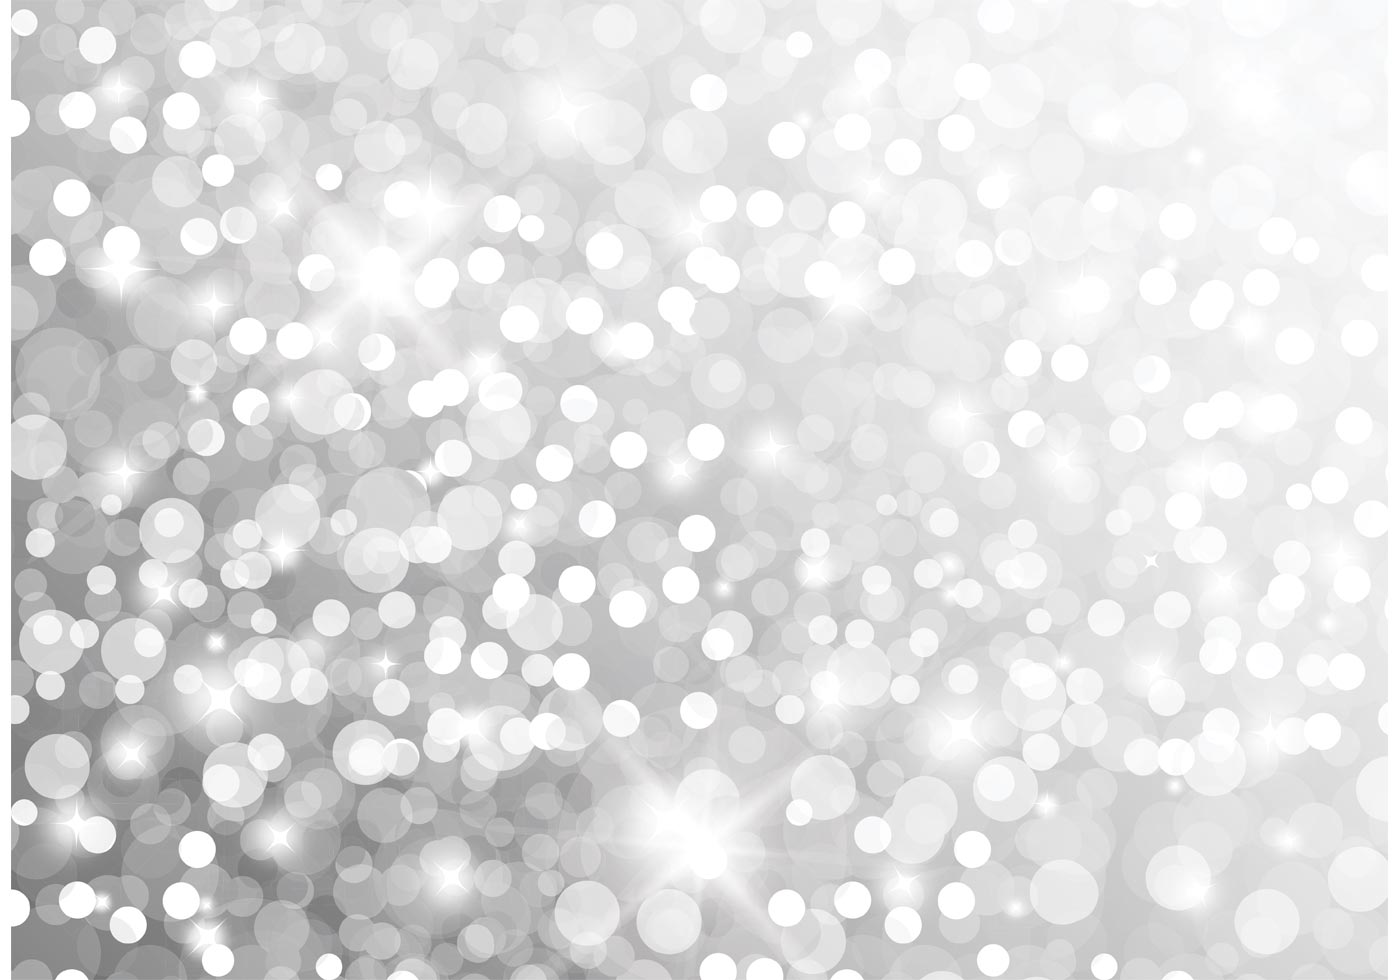 Free download silver bling background free bling vector art free downloads x for your desktop mobile tablet explore silver bling wallpaper bling glitter wallpaper wallpaper with bling